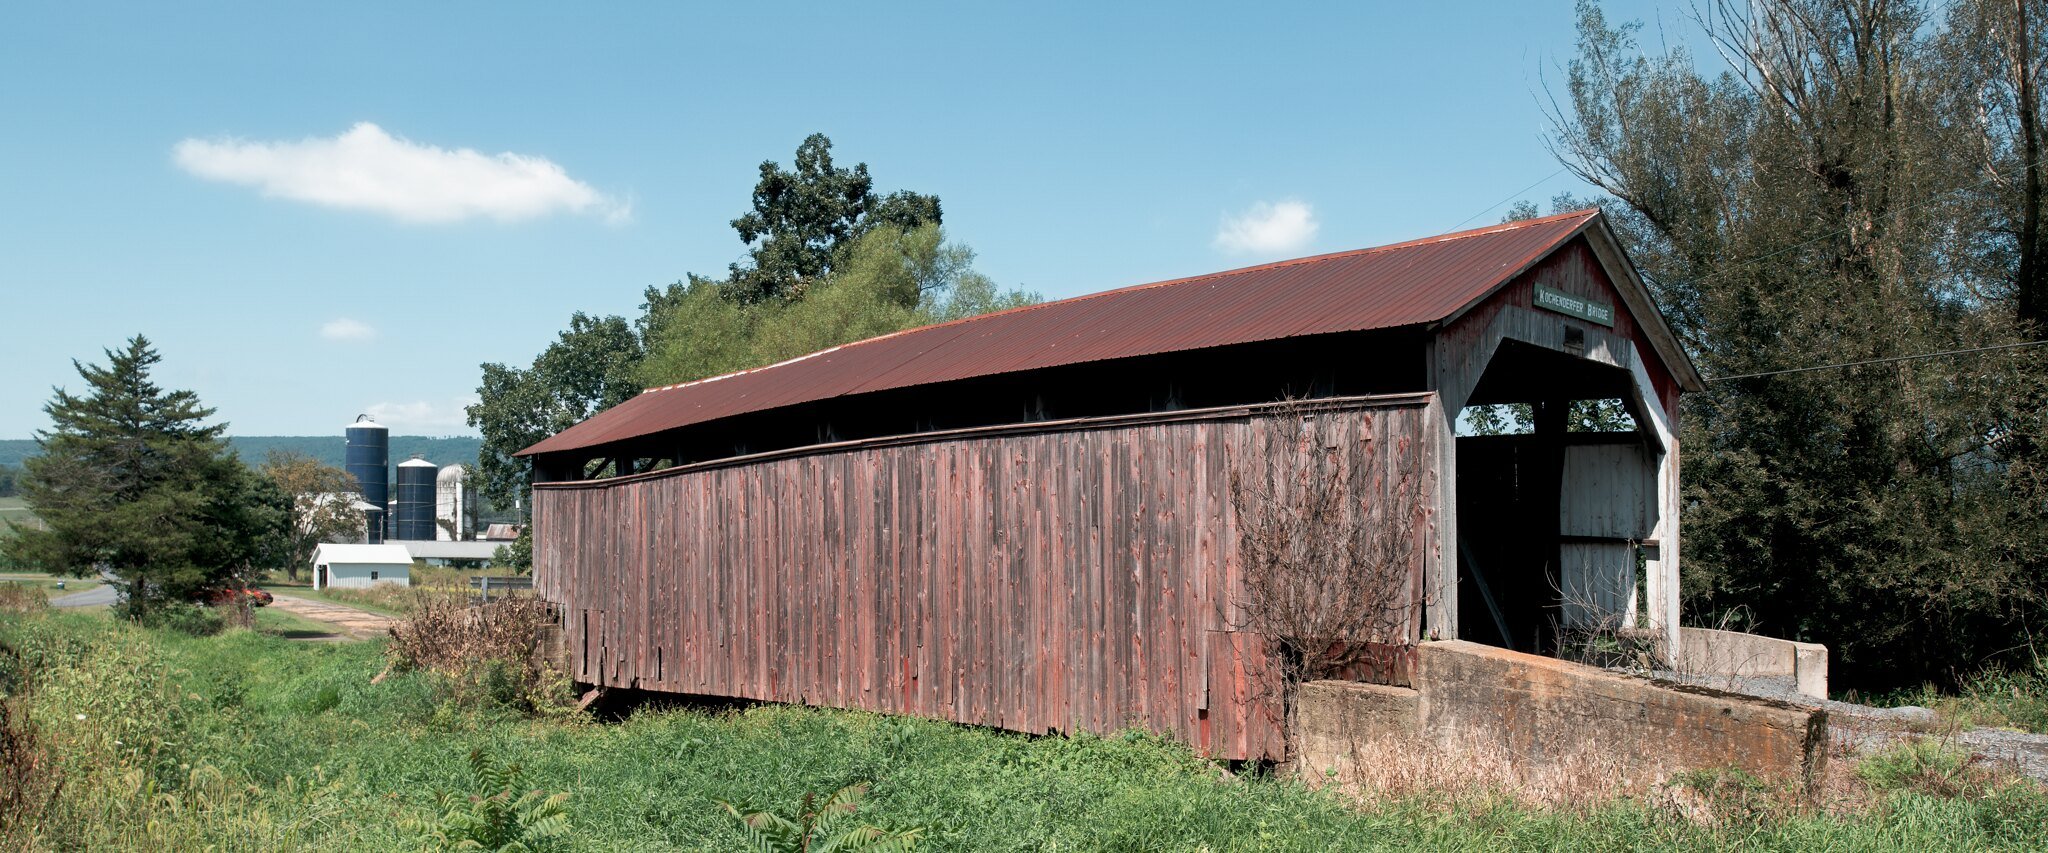  Kochenderfer Covered Bridge in Saville Township, Perry County, PA.  Built in 1919. 